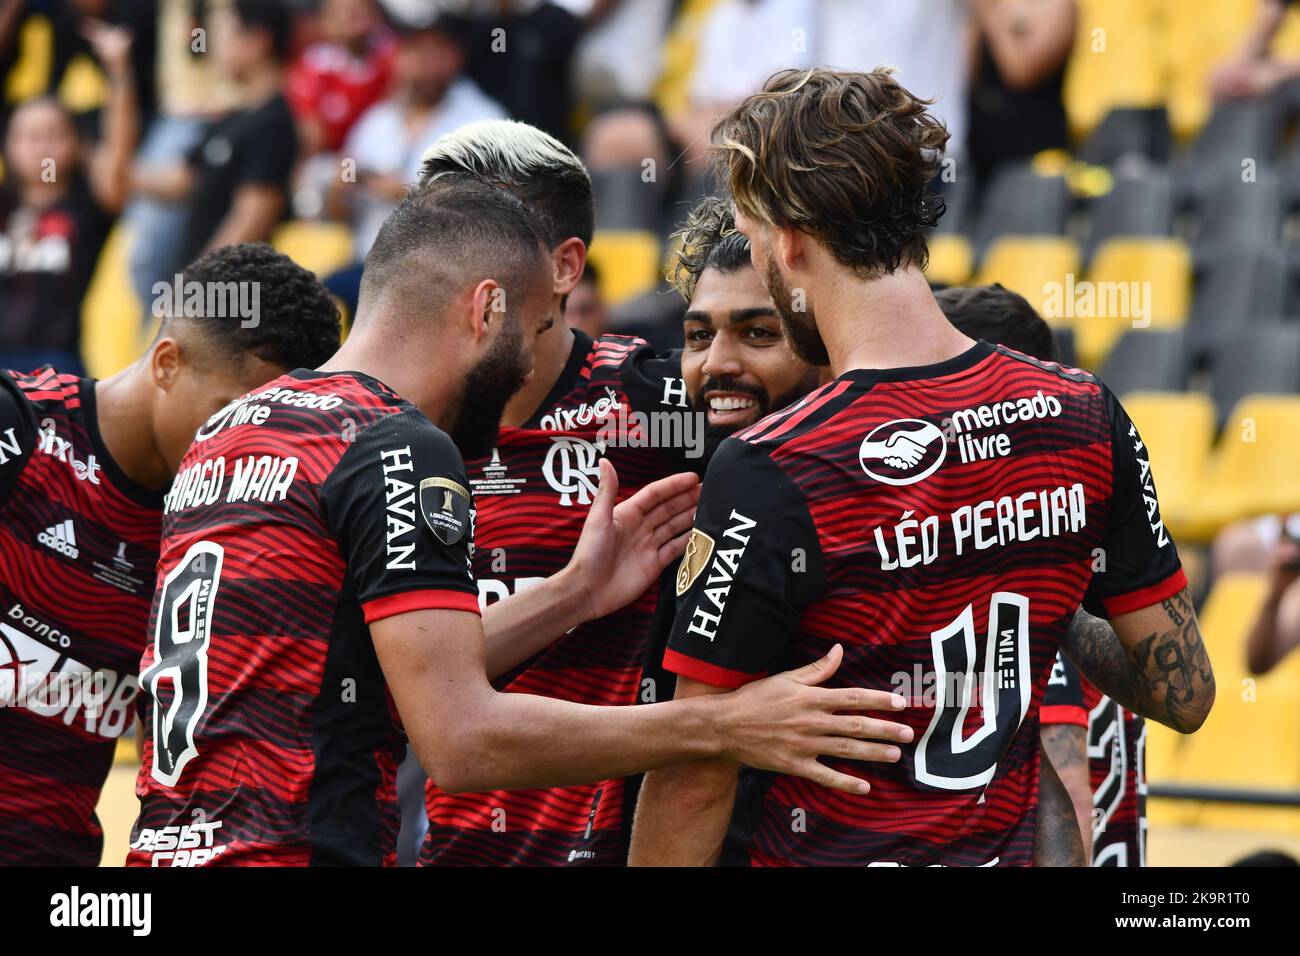 Guayaquil, Ecuador. 29th Oct, 2022. 29th October 2022: Tarqui, northern Guayaquil, Ecuador; Gabriel Barbosa of Flamengo, celebrates his goal during the Final of the Copa Libertadores between Flamengo and Atletico Credit: Action Plus Sports Images/Alamy Live News Stock Photo